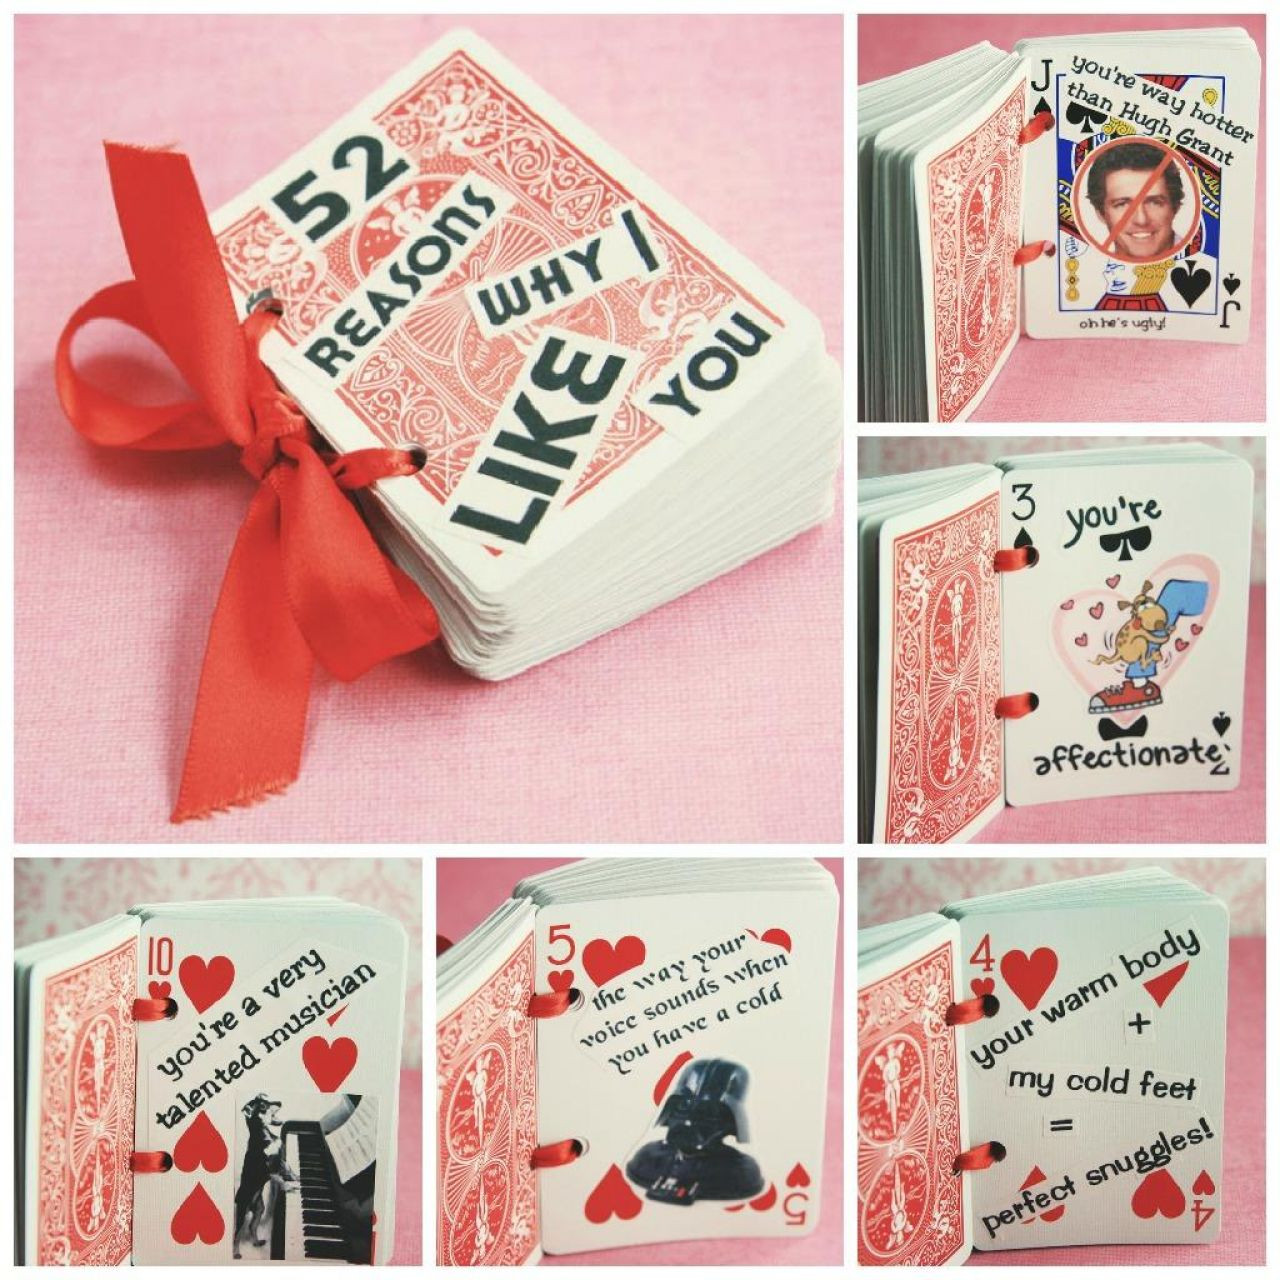 Creative Valentines Day Ideas For Him
 24 LOVELY VALENTINE S DAY GIFTS FOR YOUR BOYFRIEND